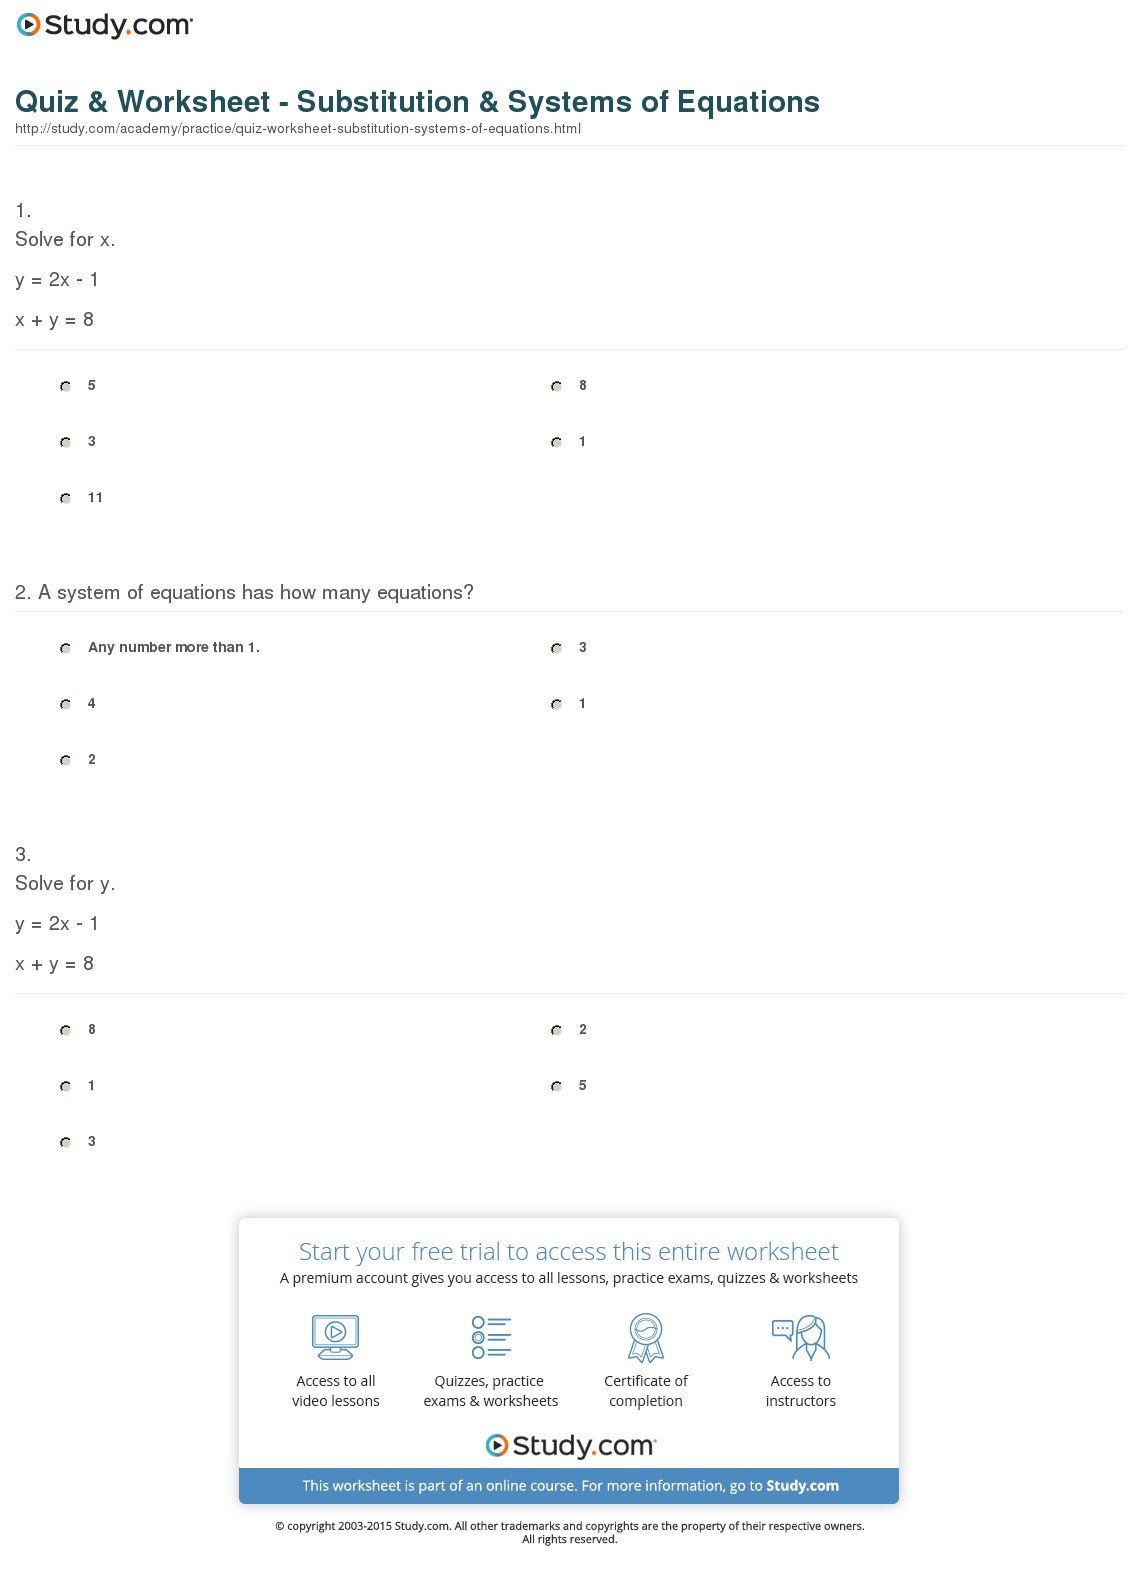 Quiz  Worksheet  Substitution  Systems Of Equations  Study Also Solving Systems Of Equations By Substitution Worksheet Answers